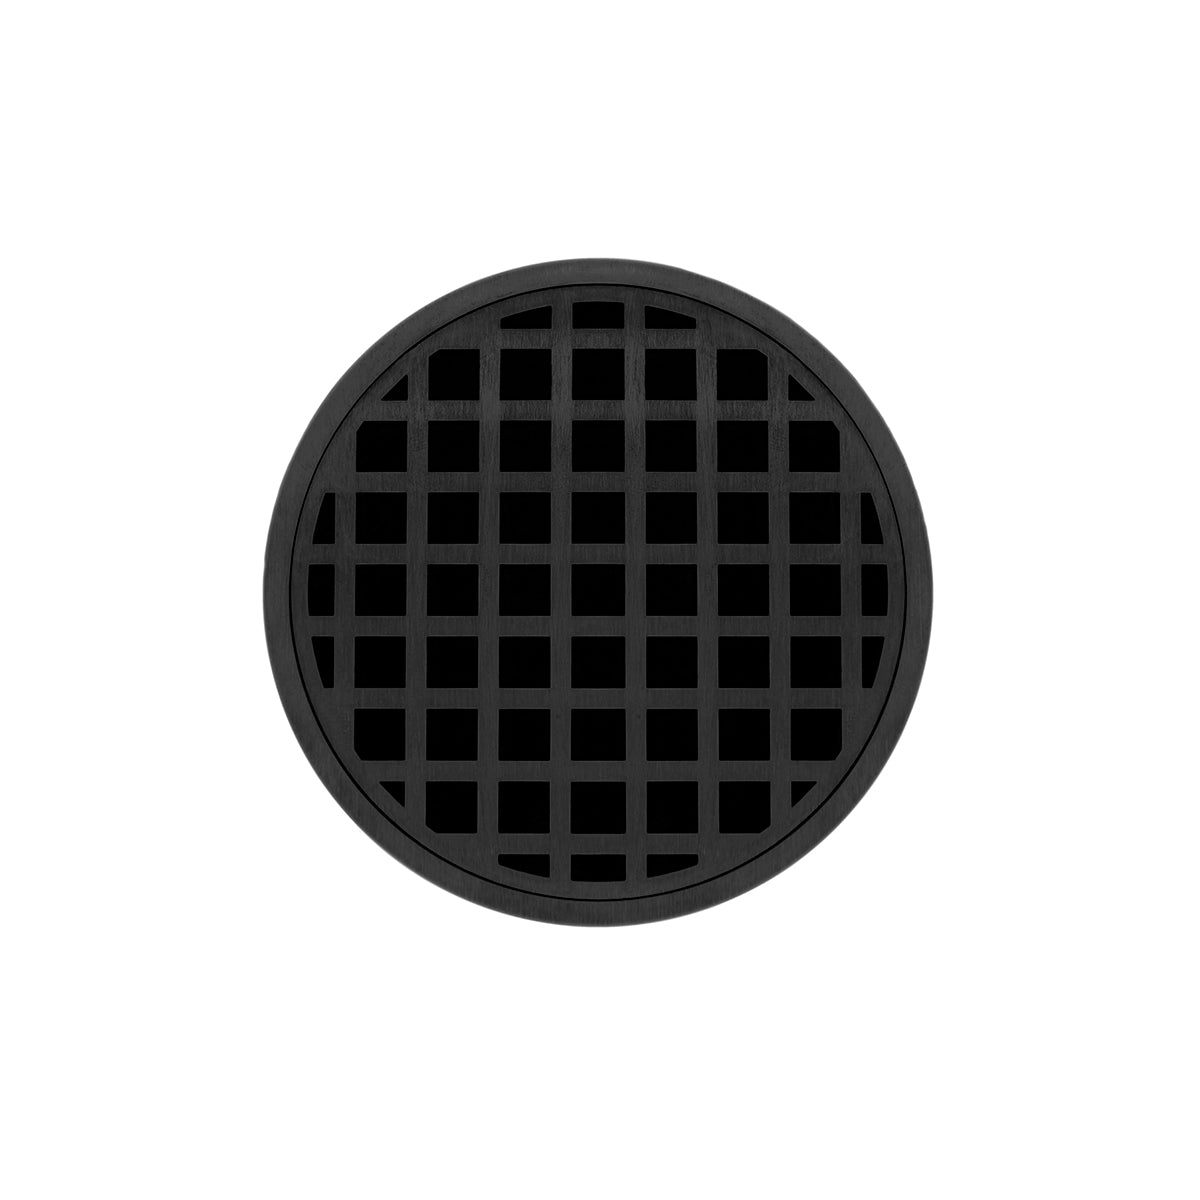 Infinity Drain 5" Round RQD 5 Premium Center Drain Kit with Squares Pattern Decorative Plate with ABS Drain Body, 2" Outlet